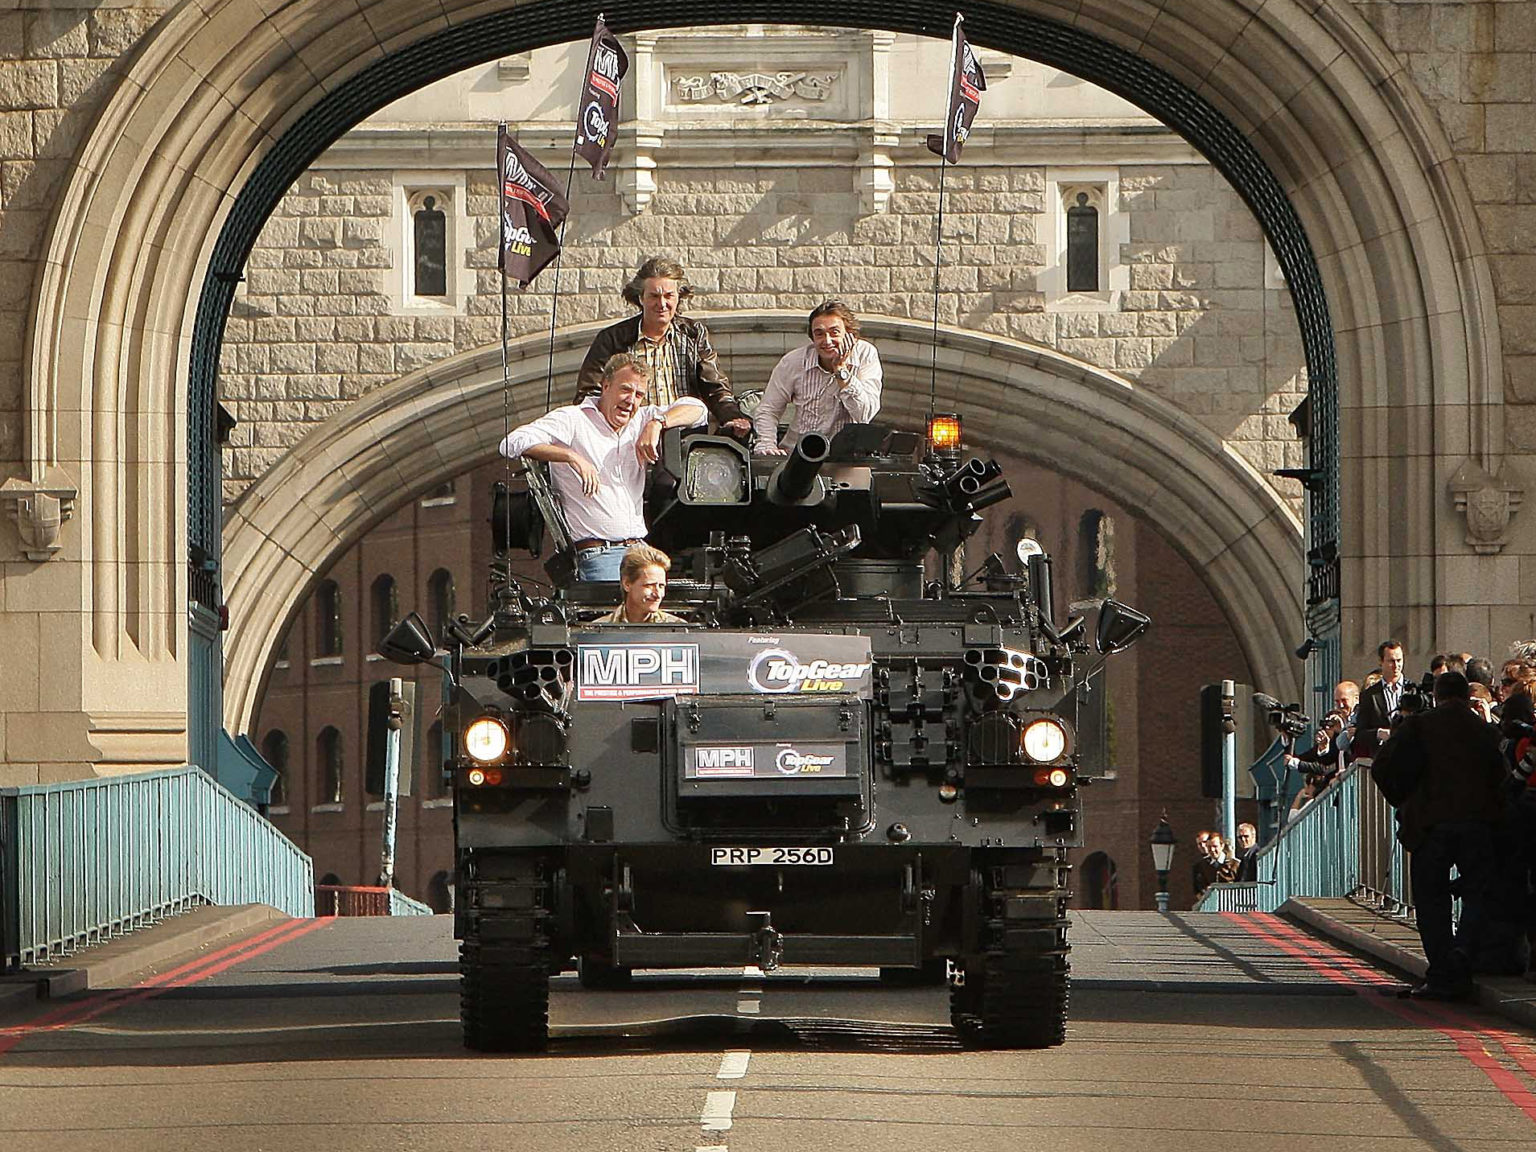 Television presenters Jeremy Clarkson, Richard Hammond and James May cross Tower Bridge on a military vehicle on September 1, 2008 in London. The trio took part in the stunt to promote a live travelling show version of their popular TV series Top Gear.